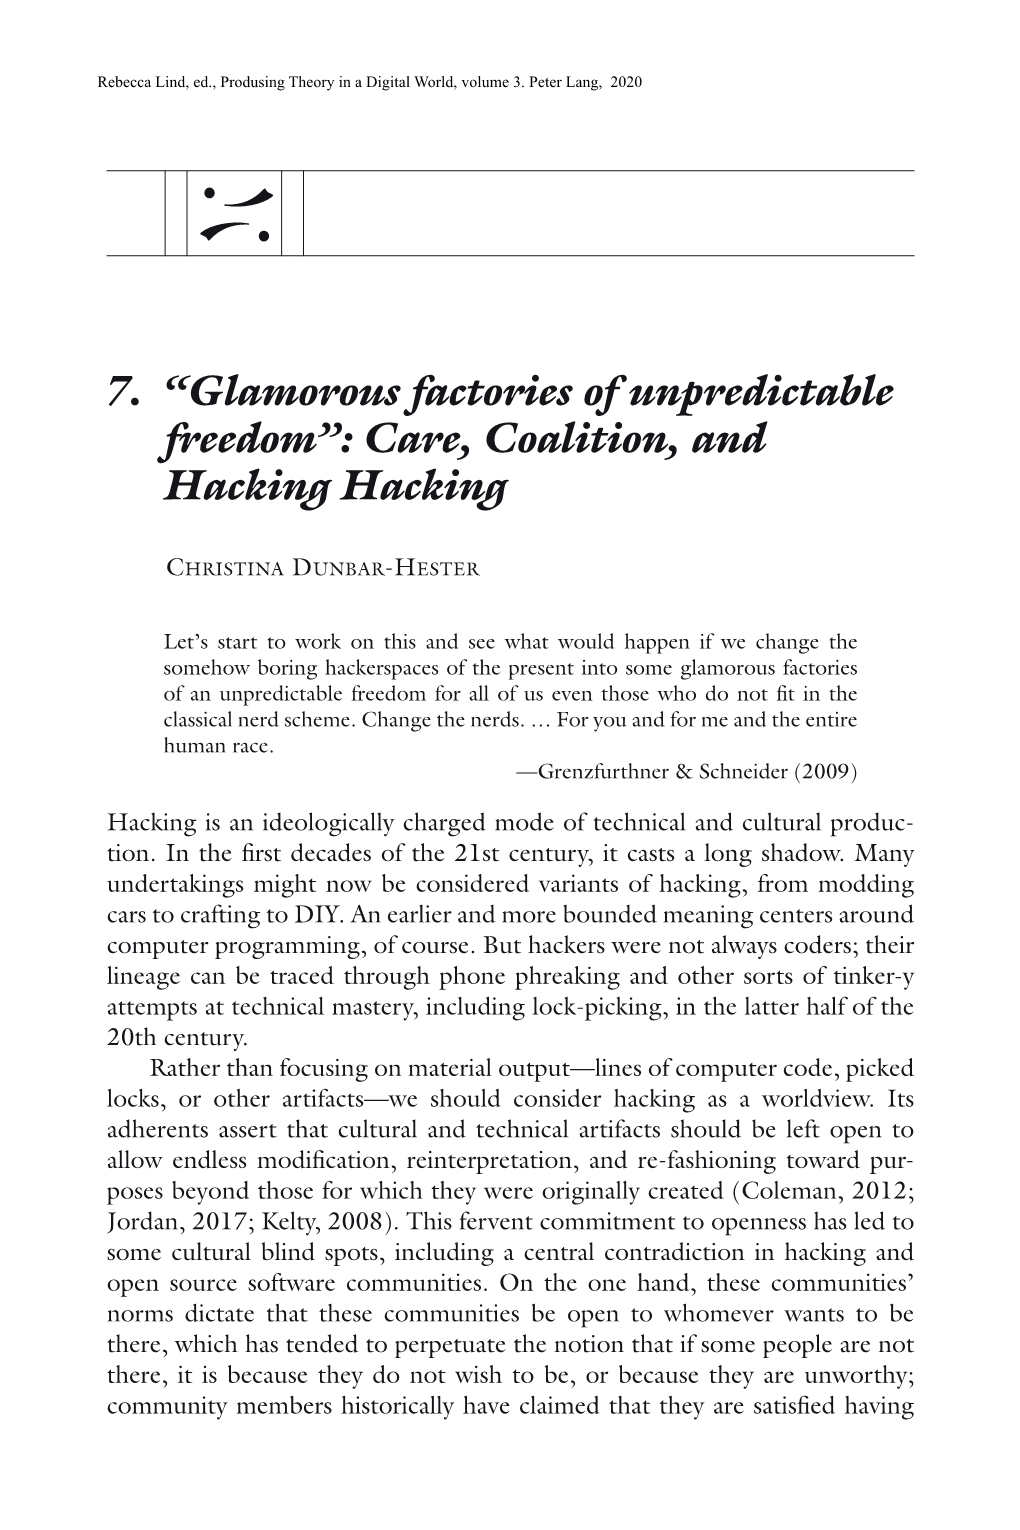 “Glamorous Factories of Unpredictable Freedom”: Care, Coalition, and Hacking Hacking